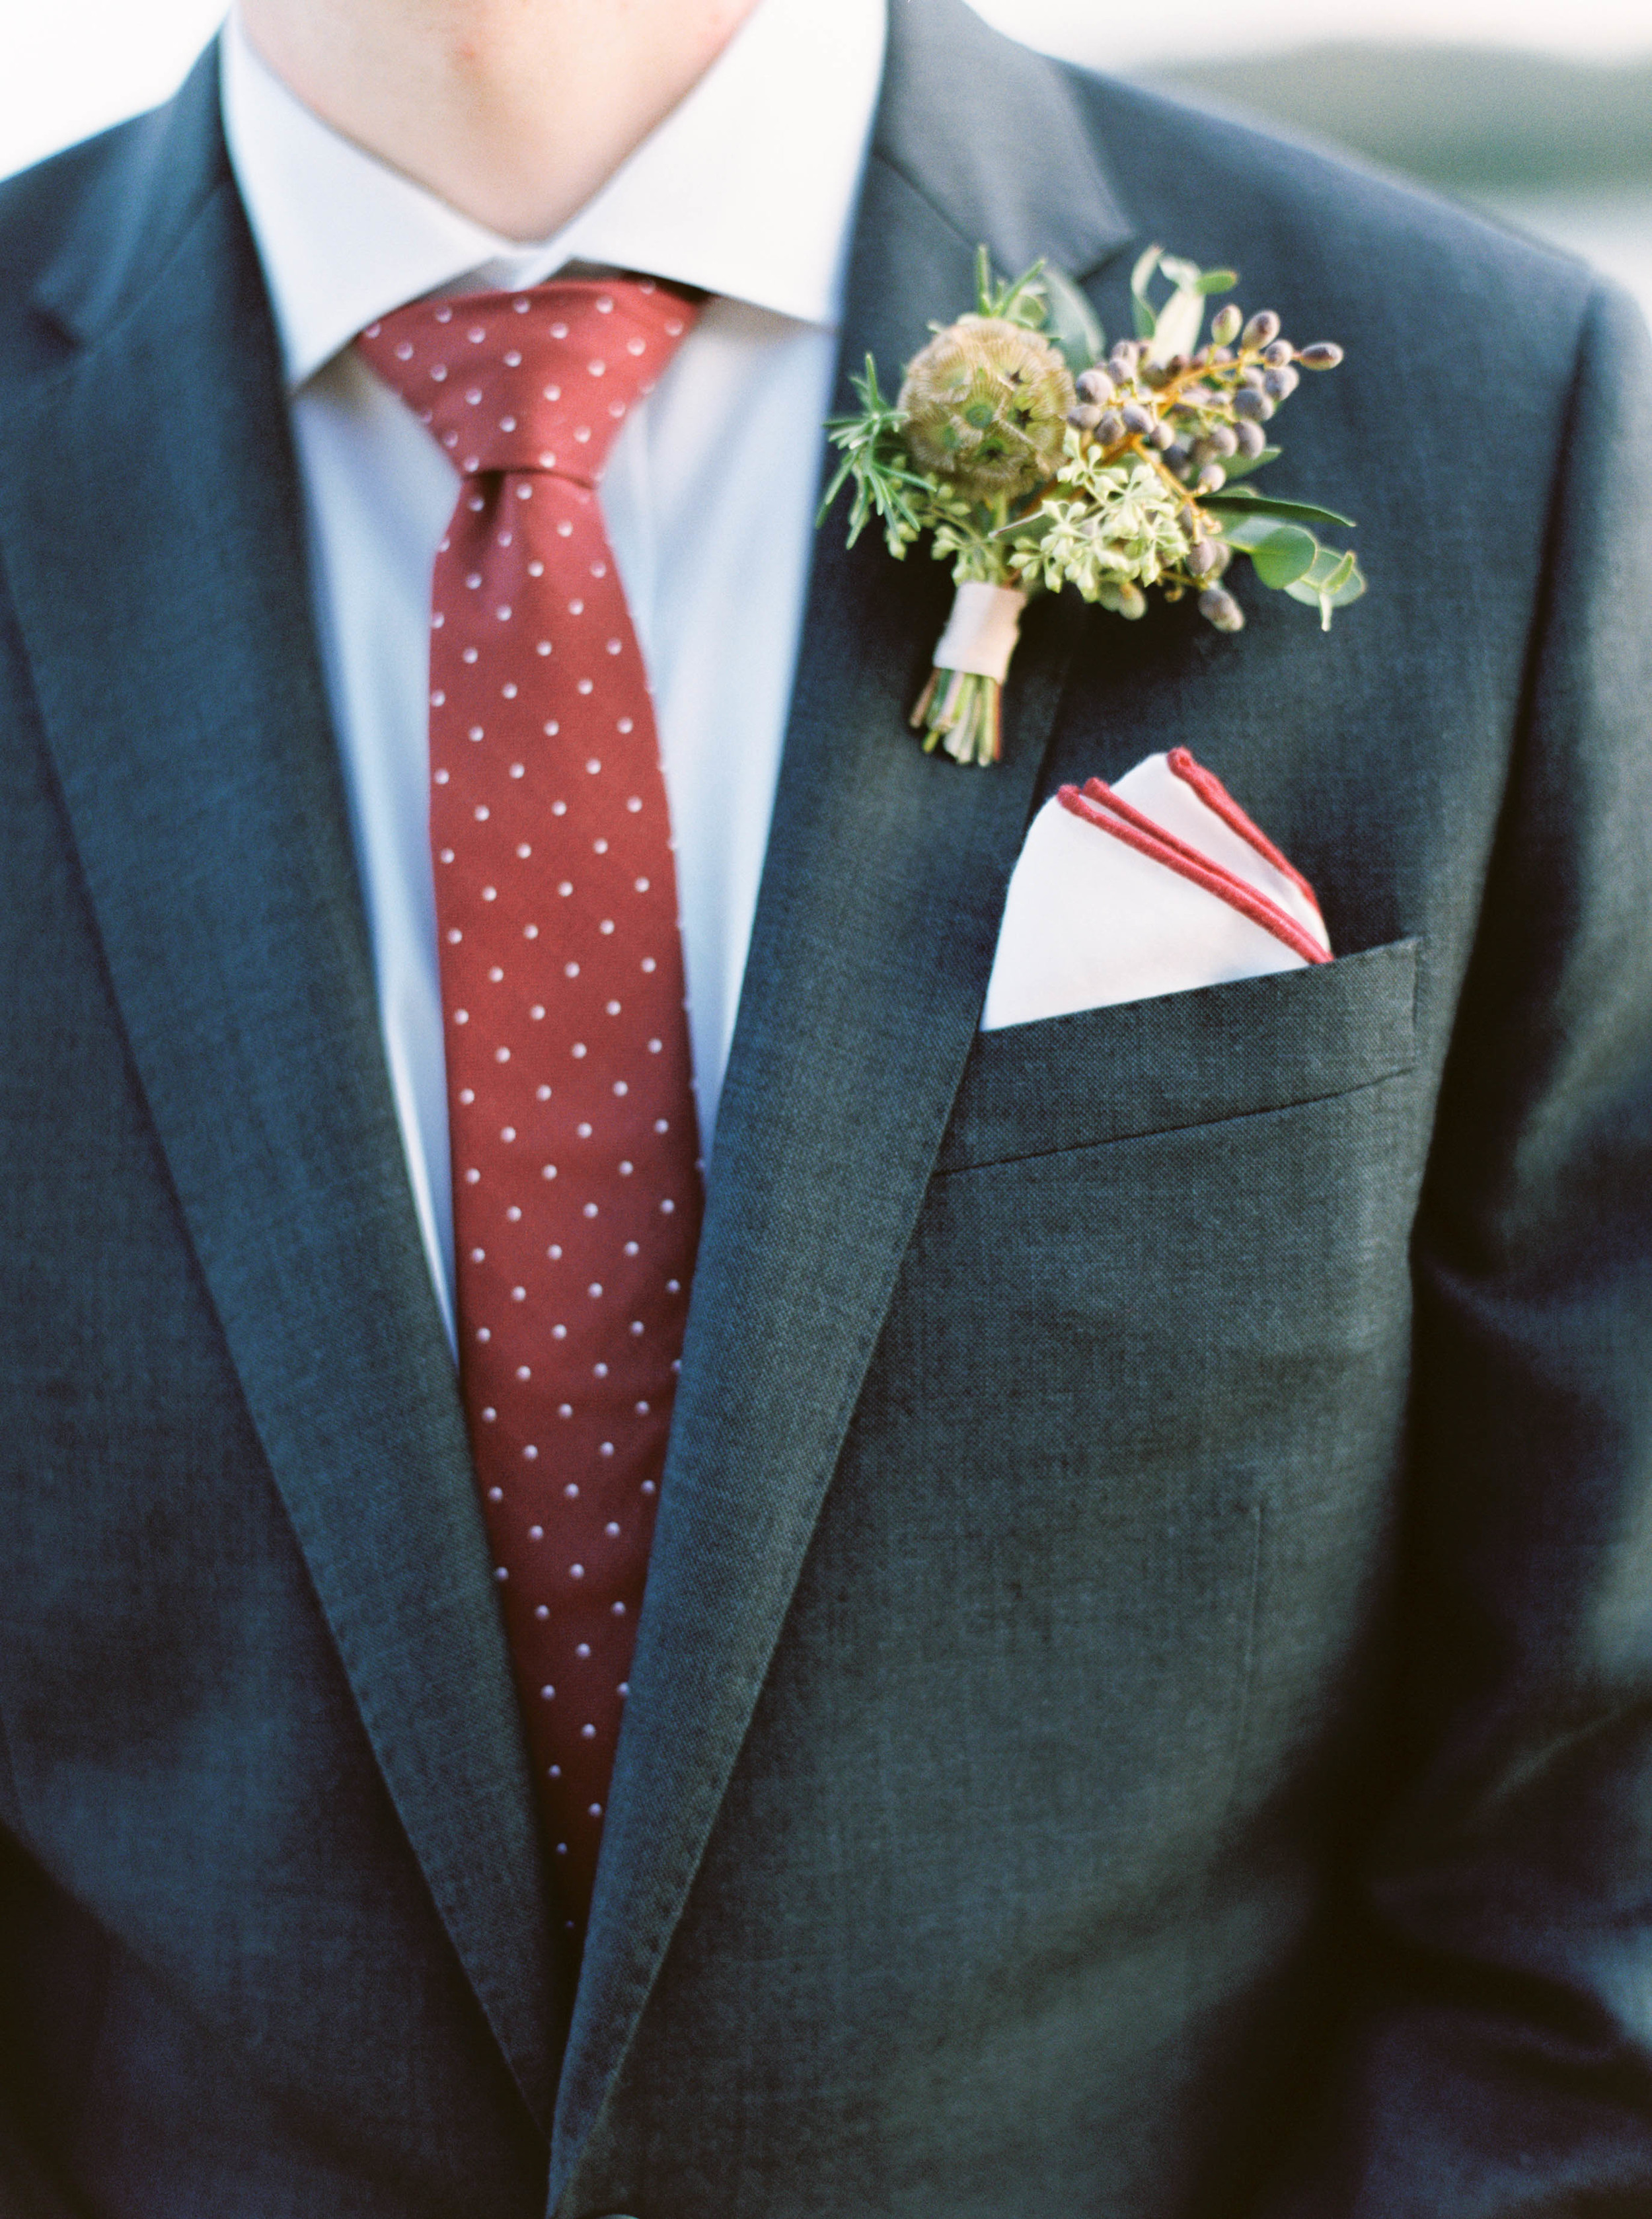 Natural, organic boutonniere with berries and greenery // Nashville Wedding Florist